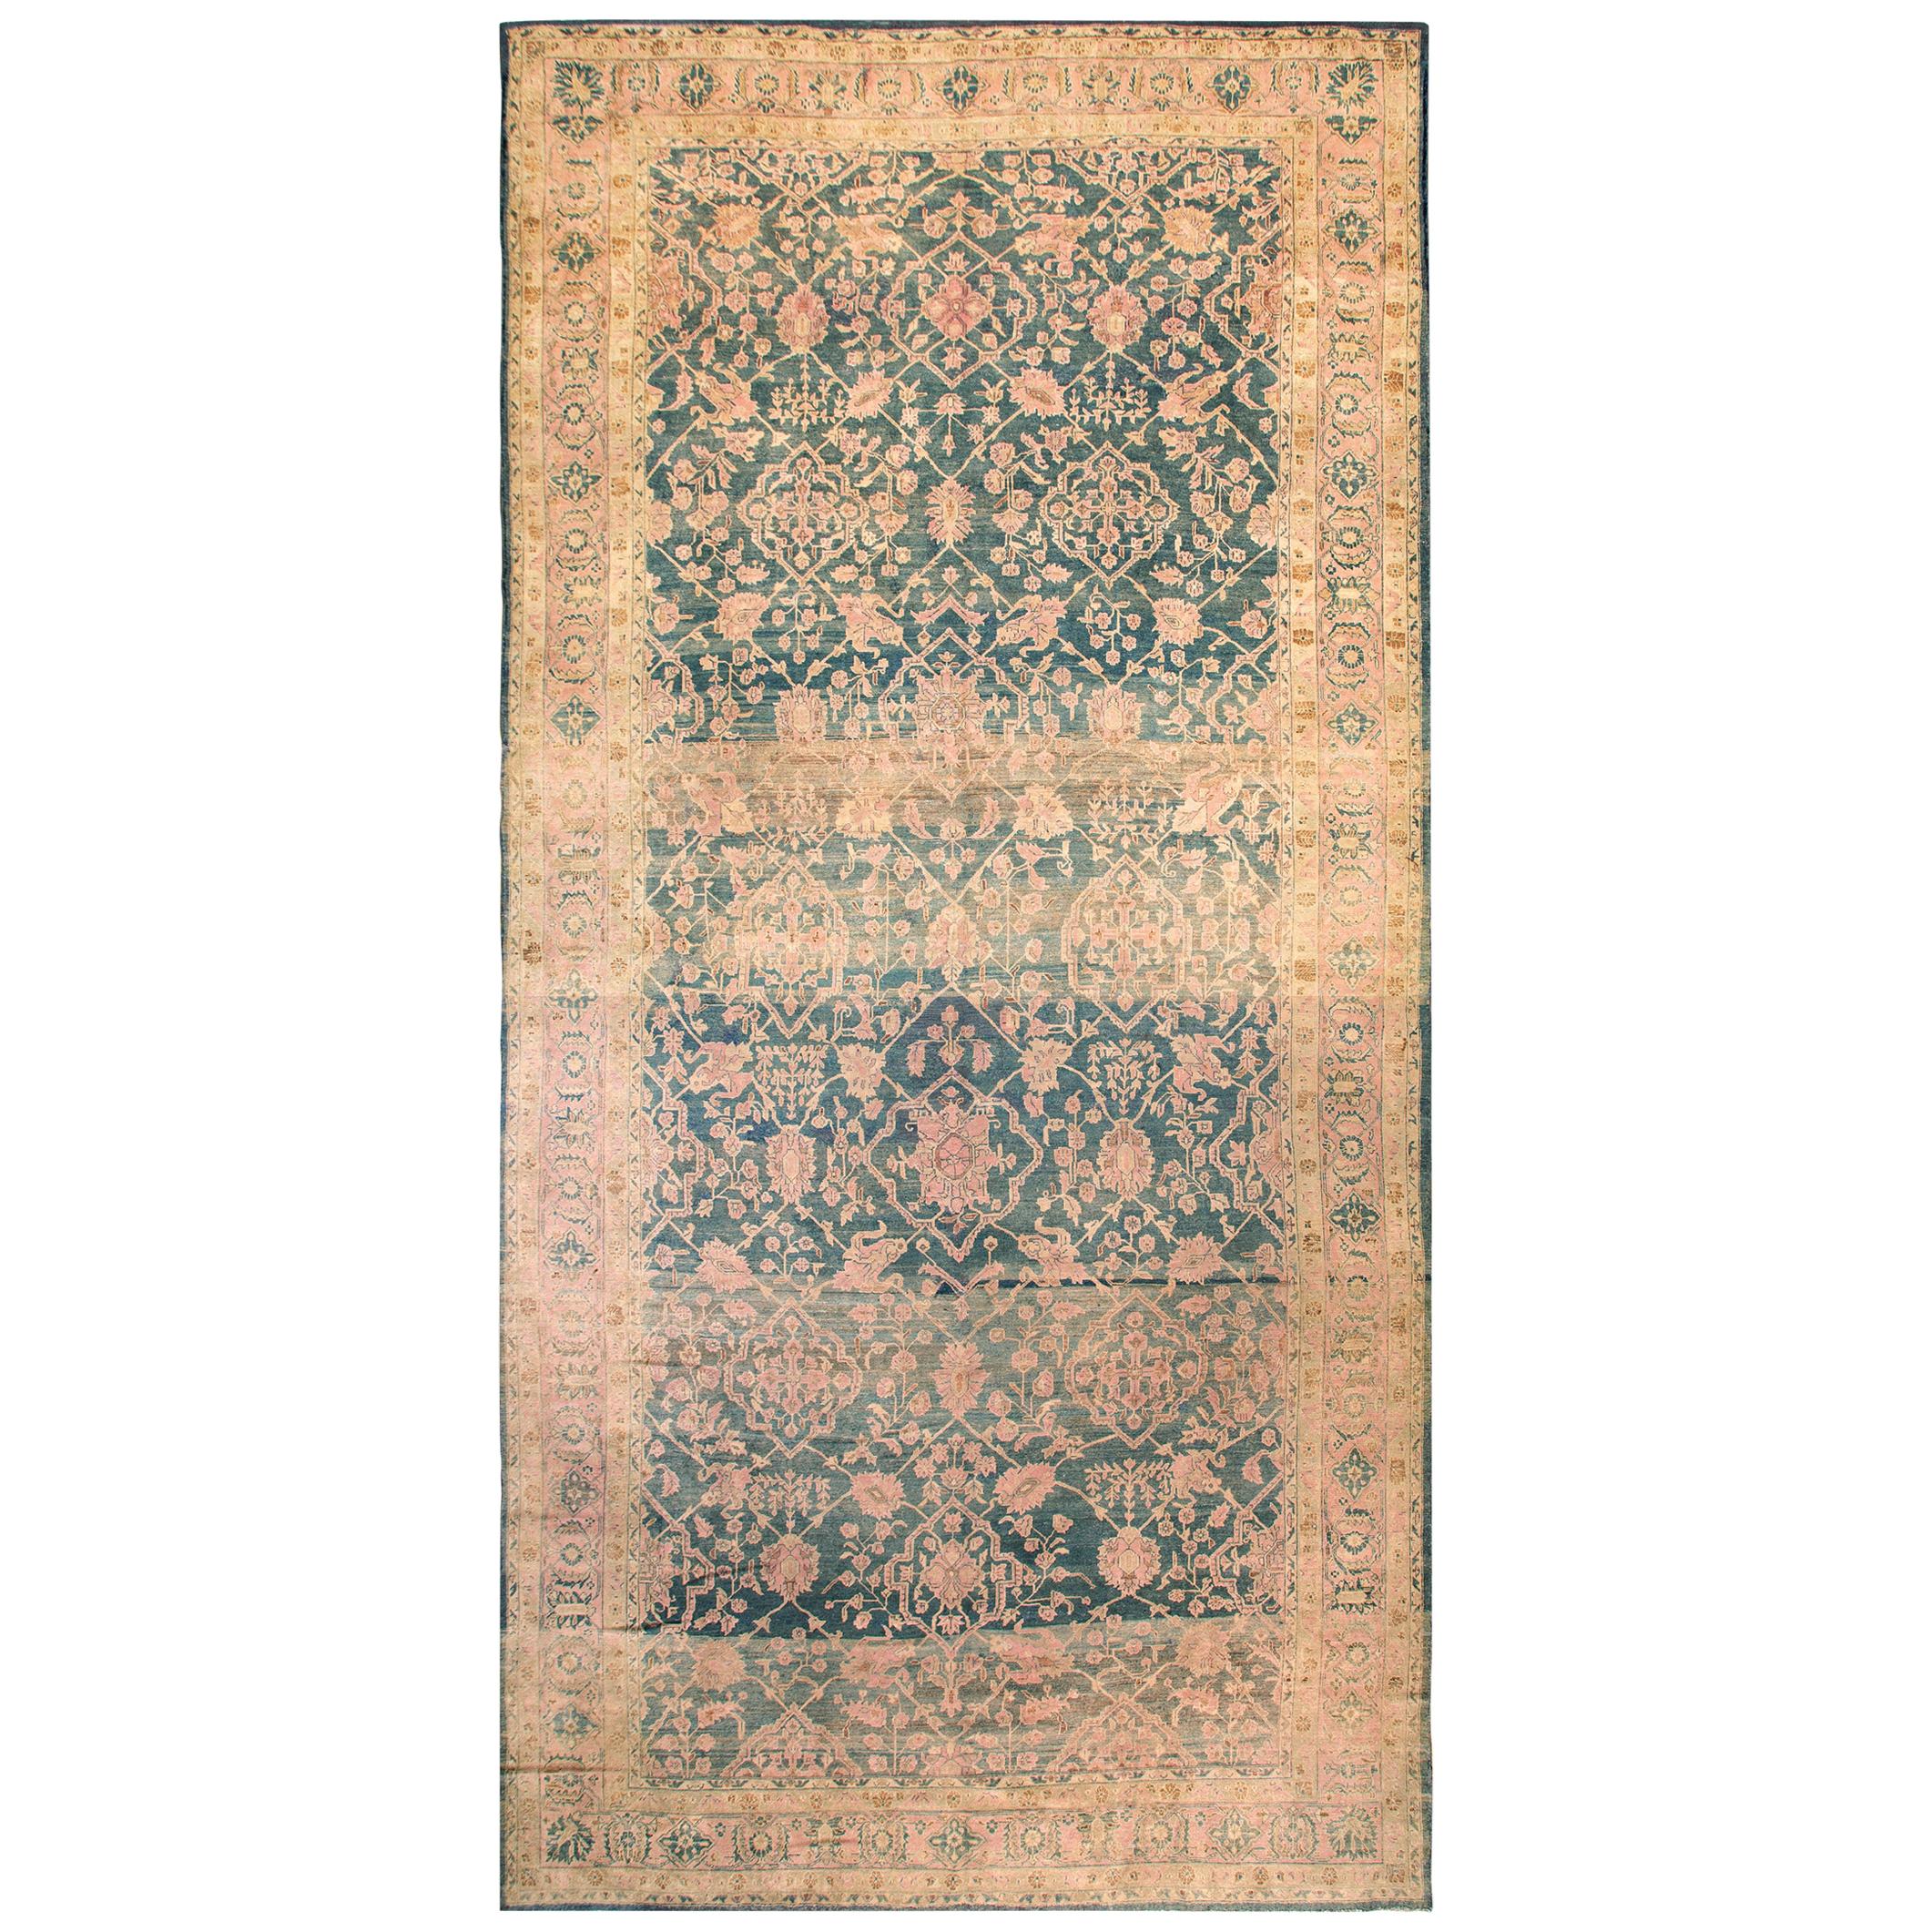 Early 20th Century Persian Malayer Carpet ( 10' x 21'4" - 305 x 650 ) For Sale